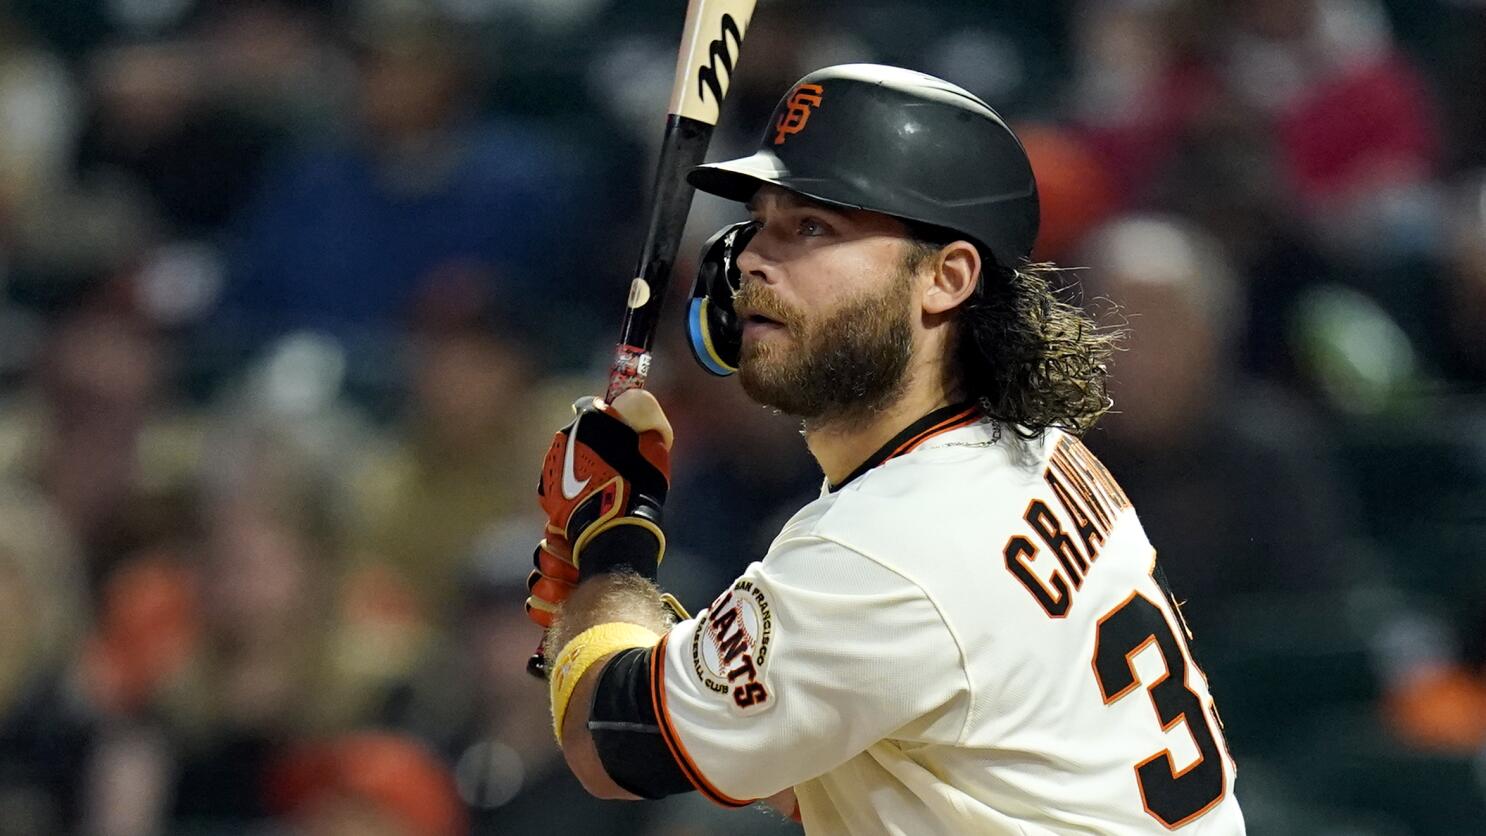 SF Giants notes: Cobb's next start, Luciano update, late start Sunday